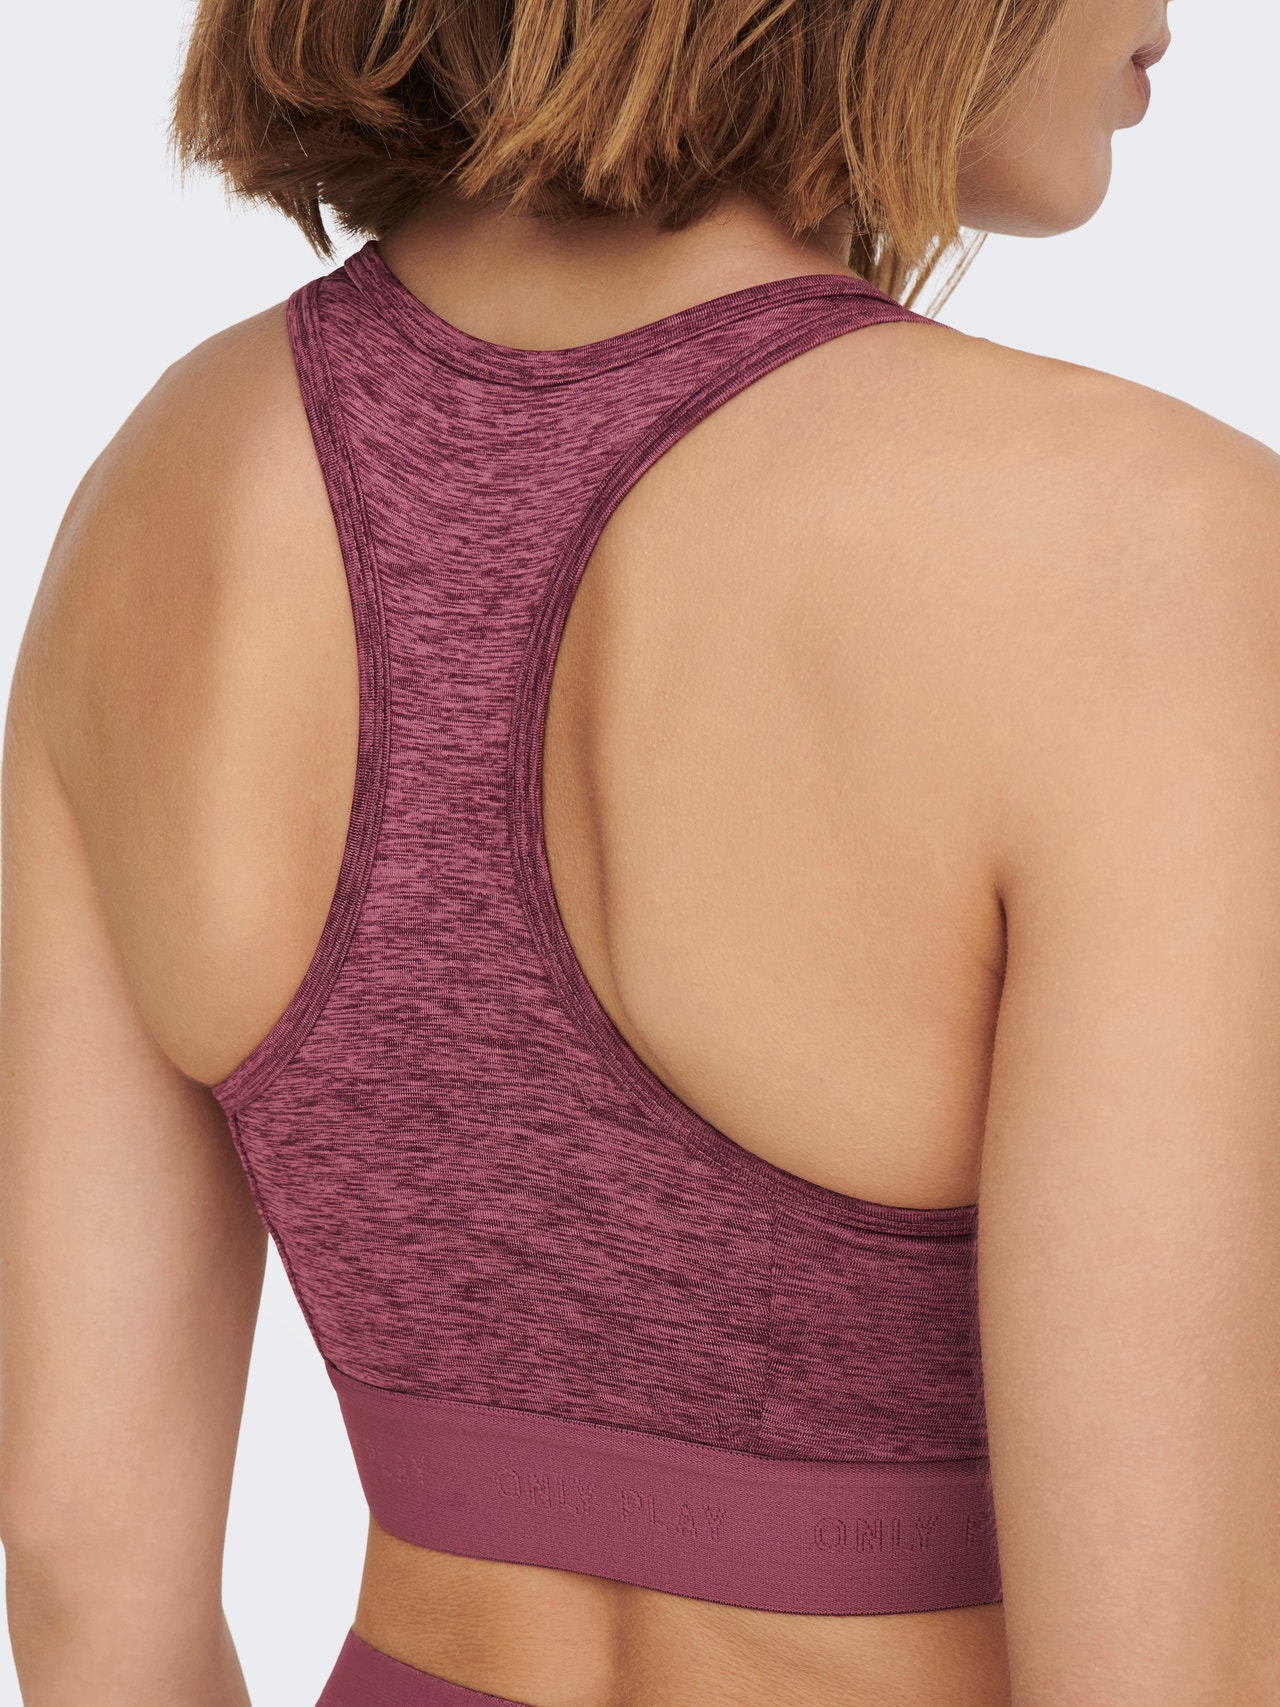 Racerback Bras with 15% discount!